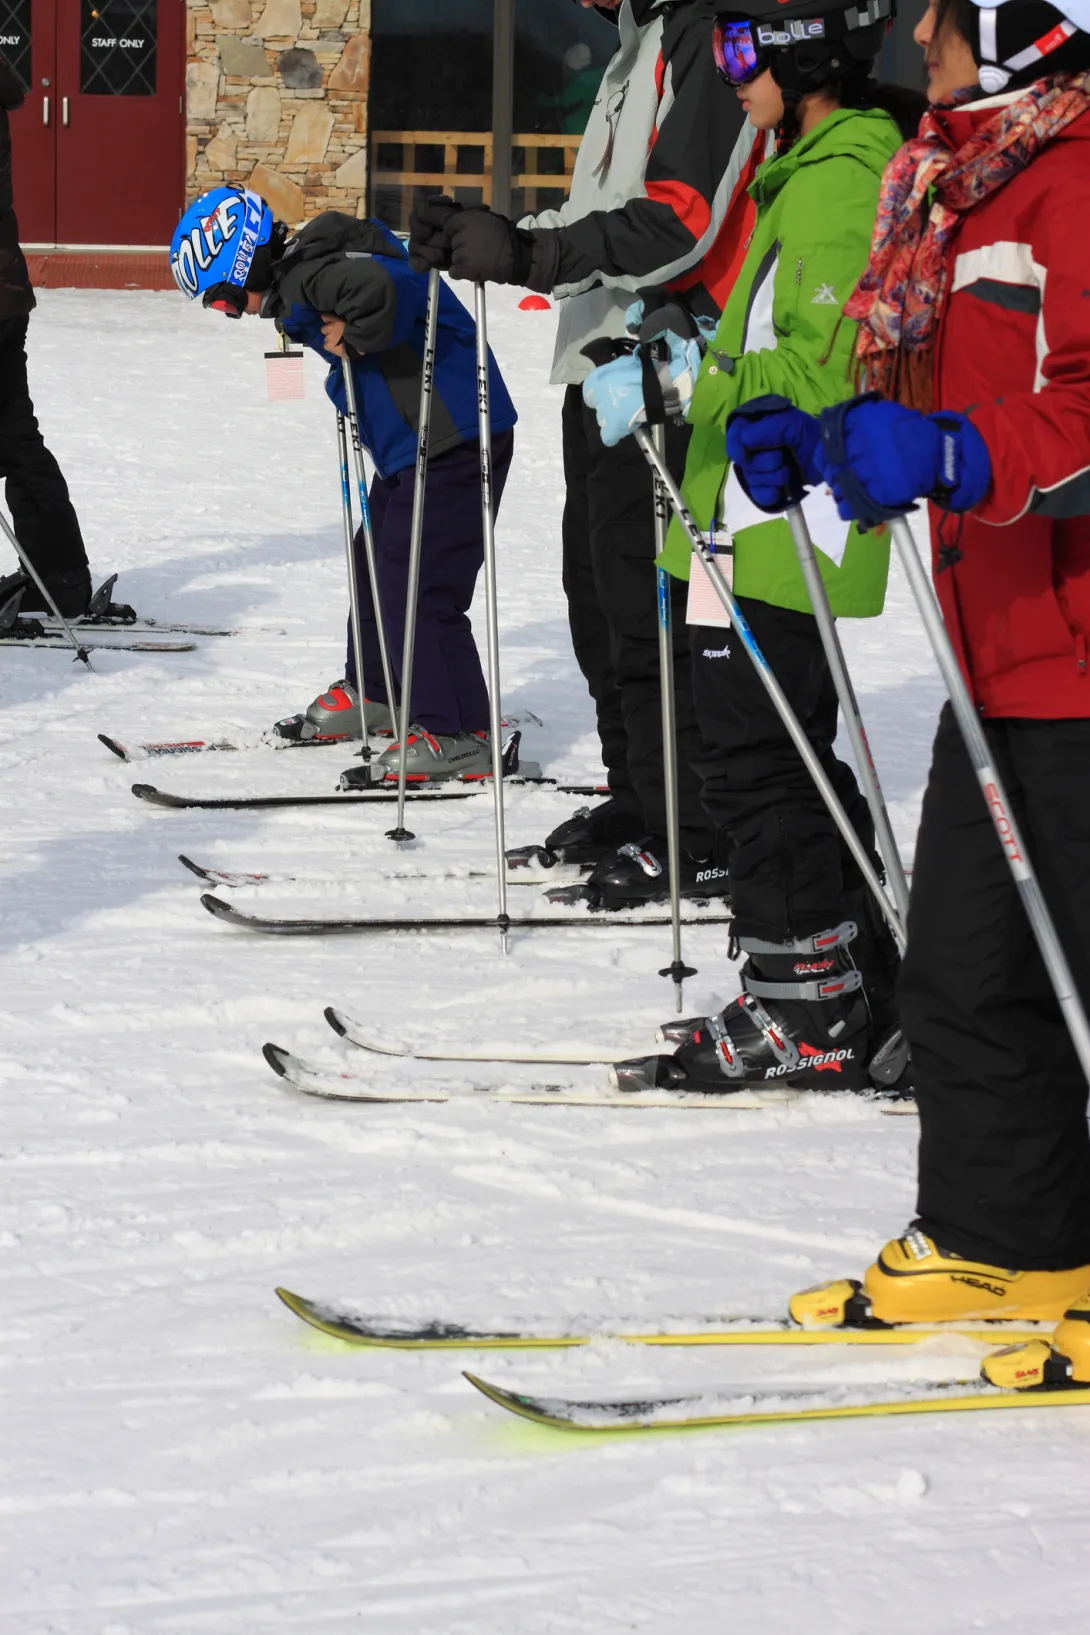 Ski class lined up for a class